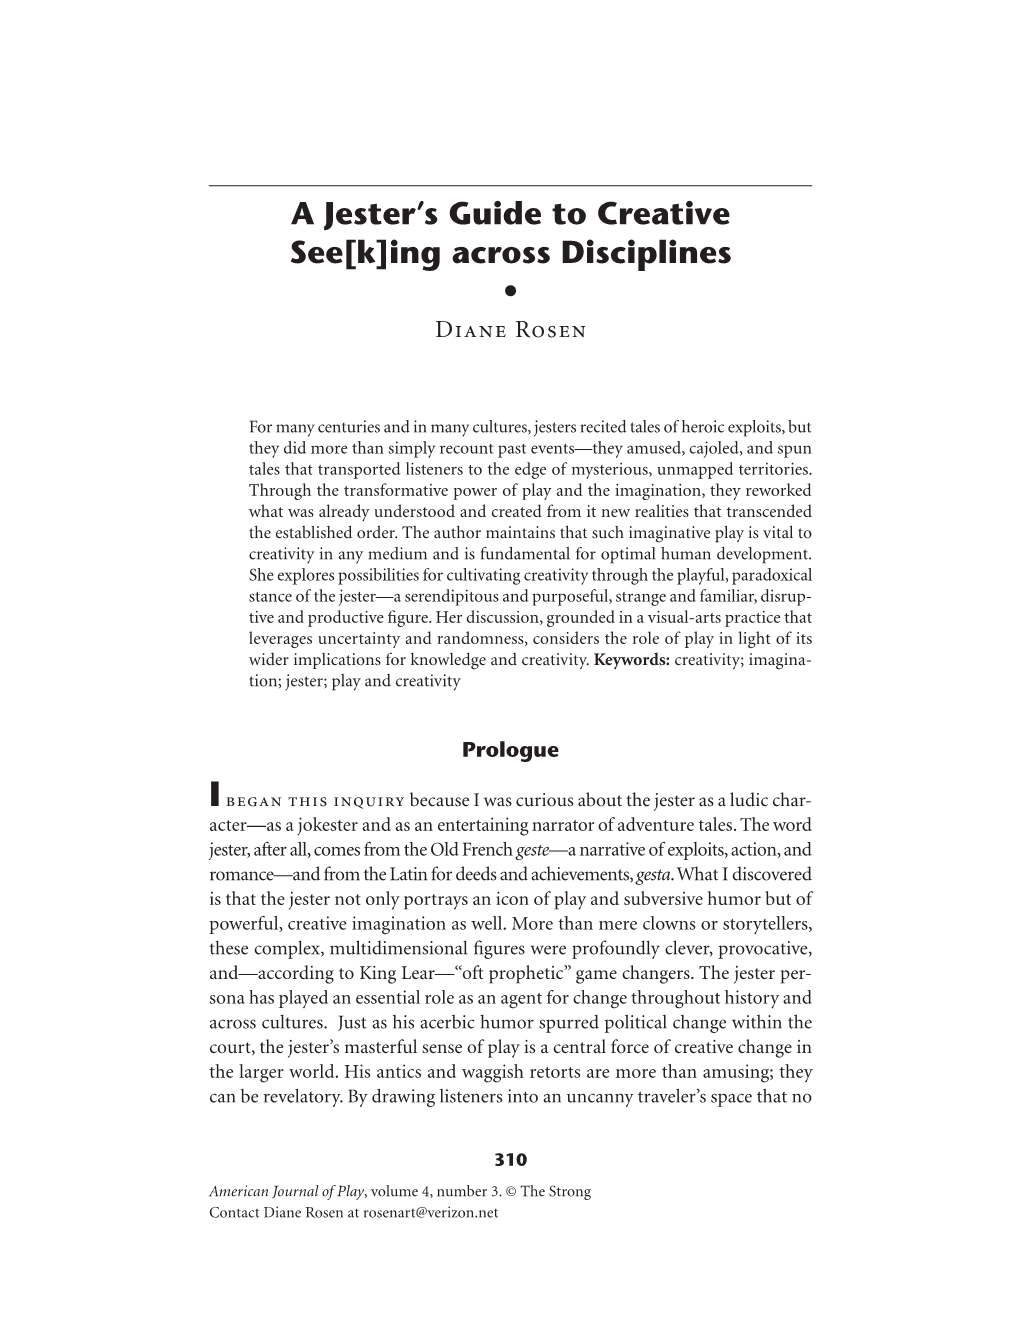 A Jester's Guide to Creative See[K]Ing Across Disciplines